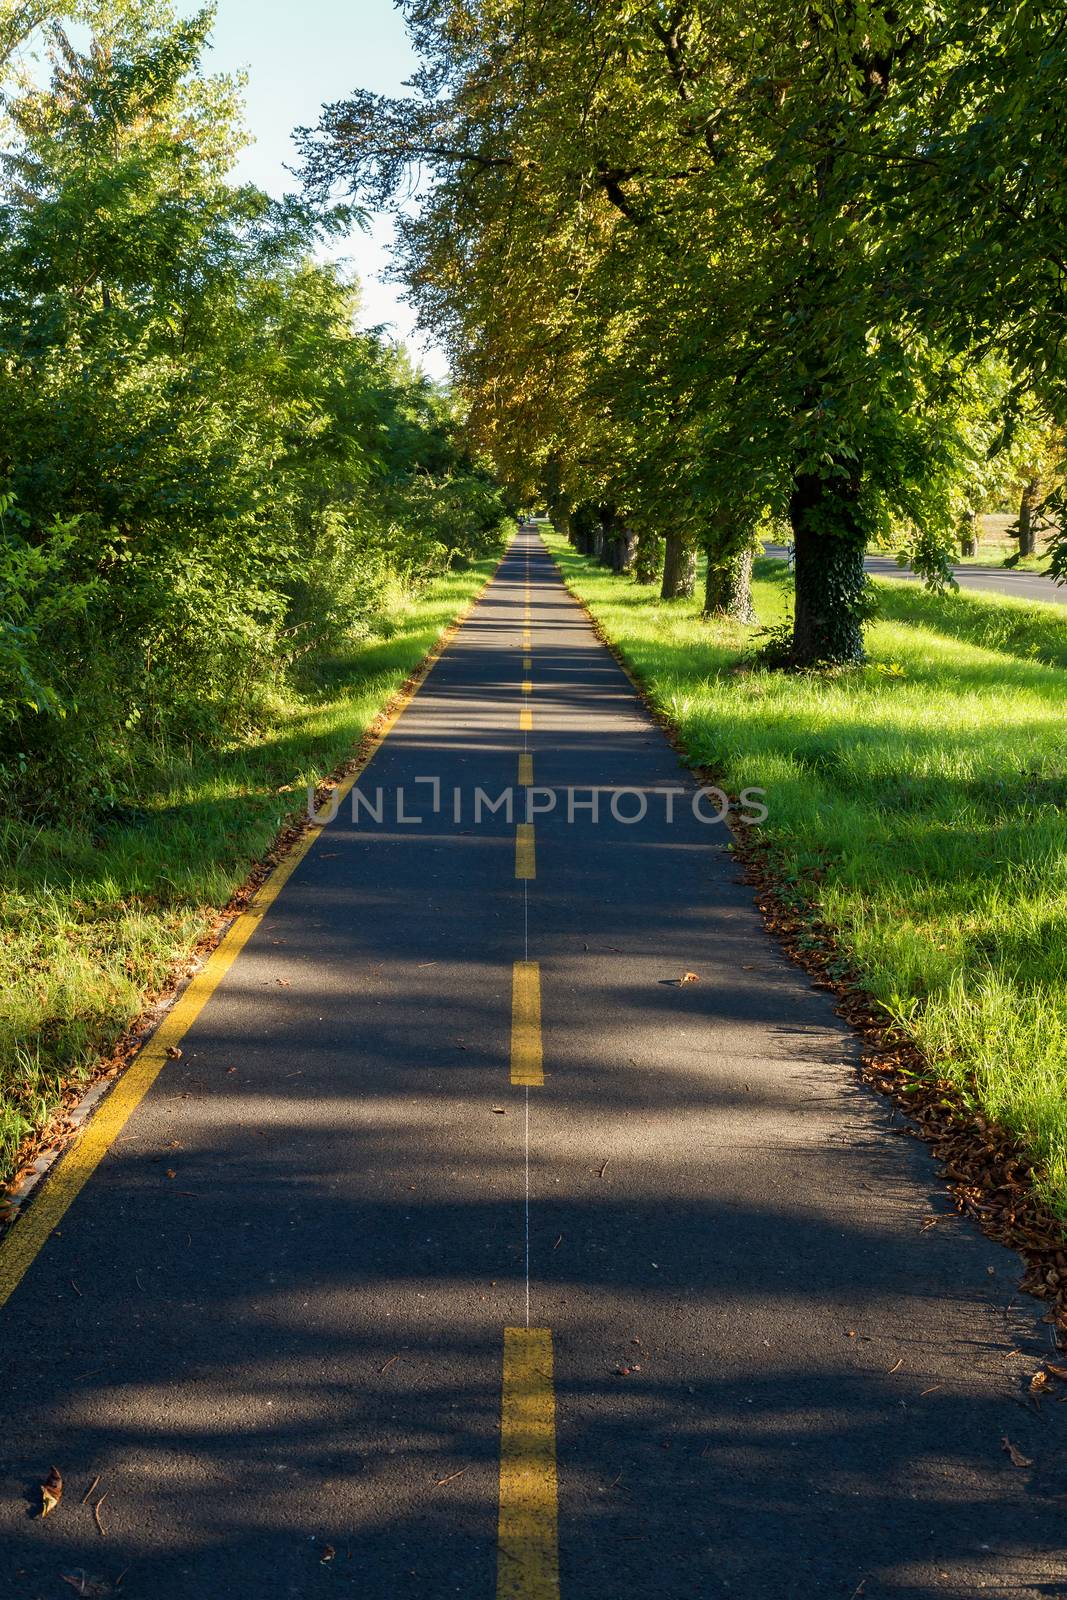 Bike path in a sunny day from Hungary by Digoarpi